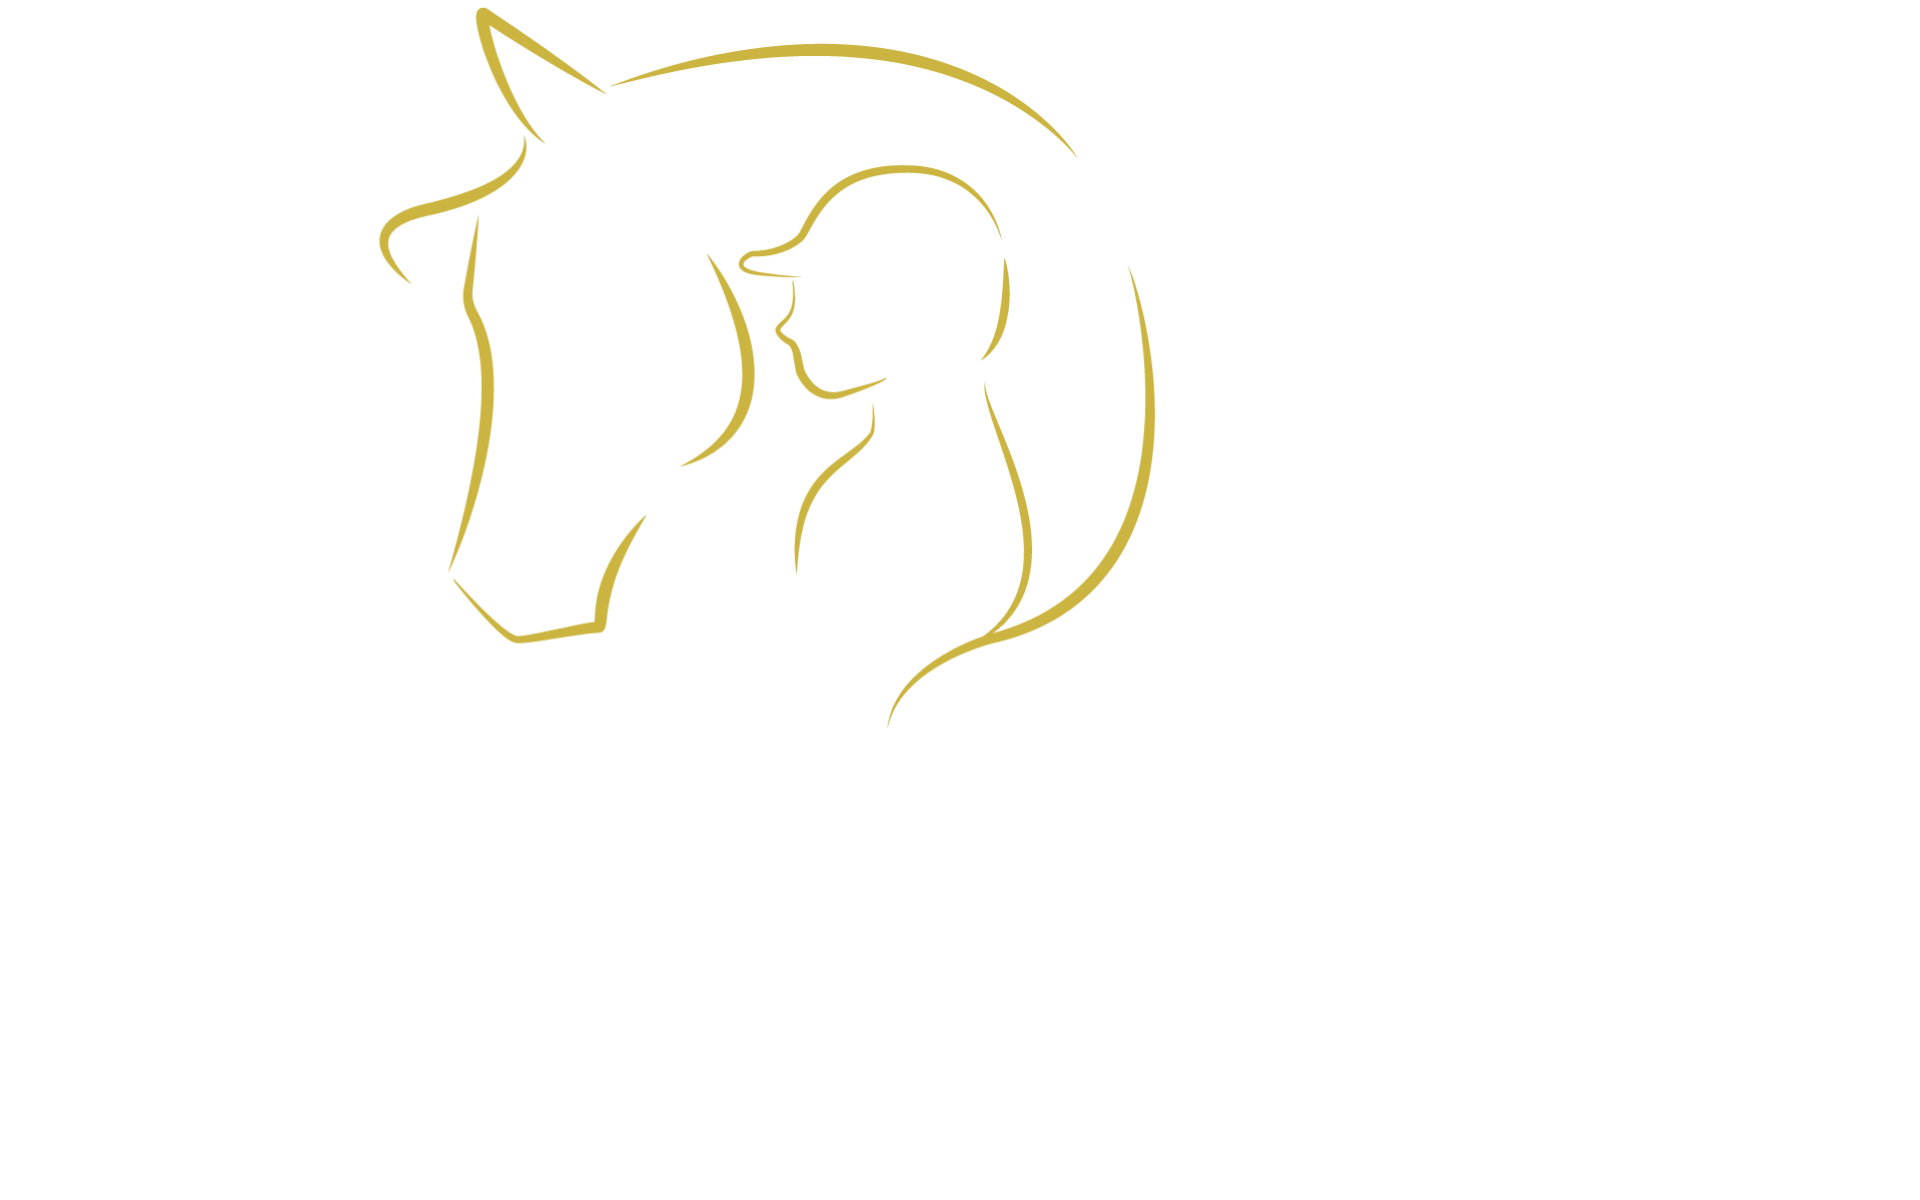 Horse and Talent